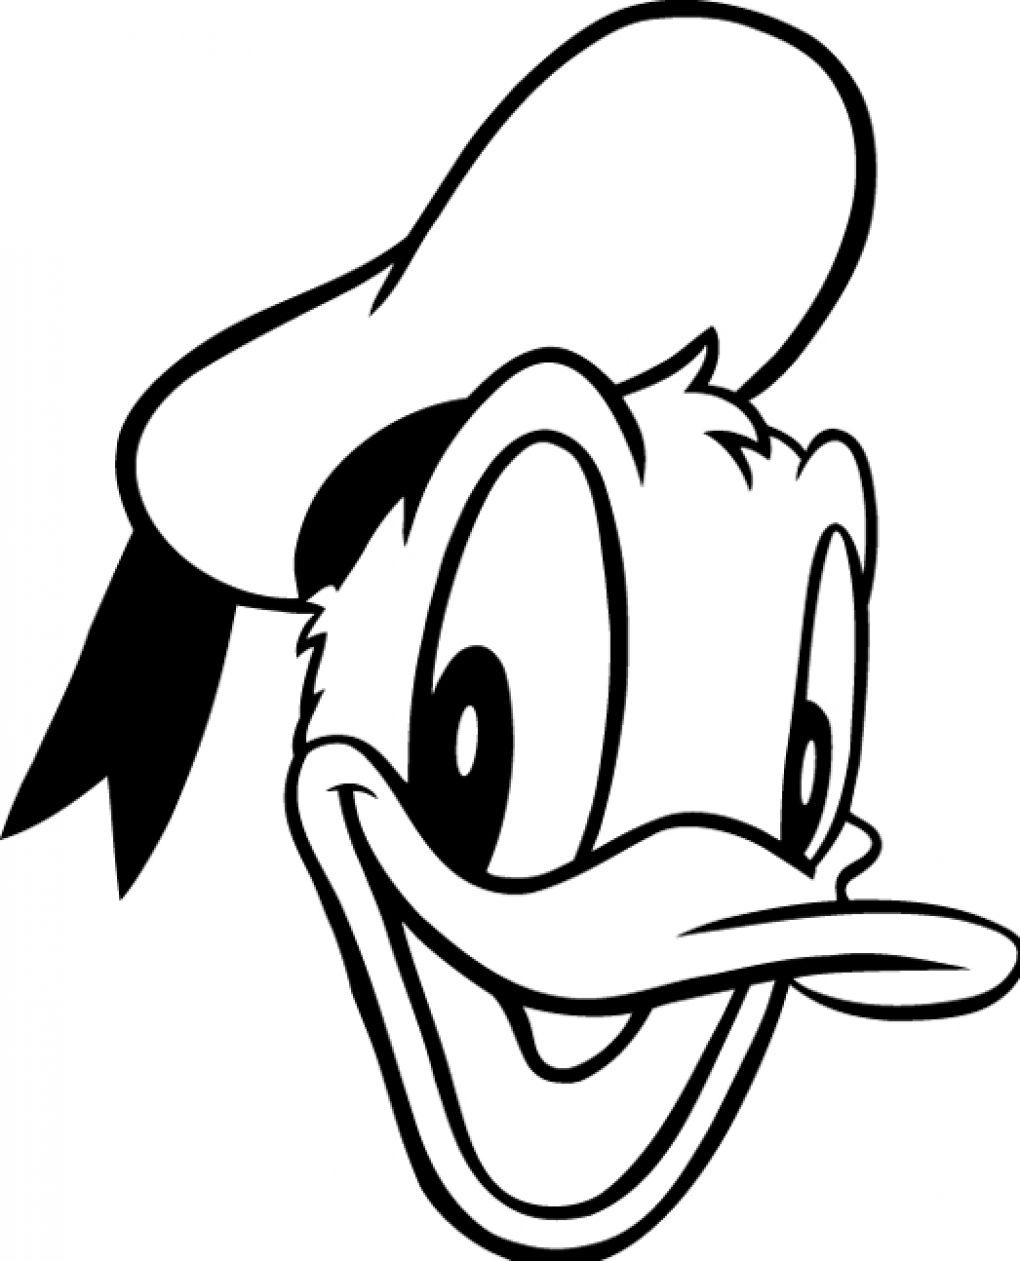 Daffy Duck Coloring Pages Printable - Coloring Page